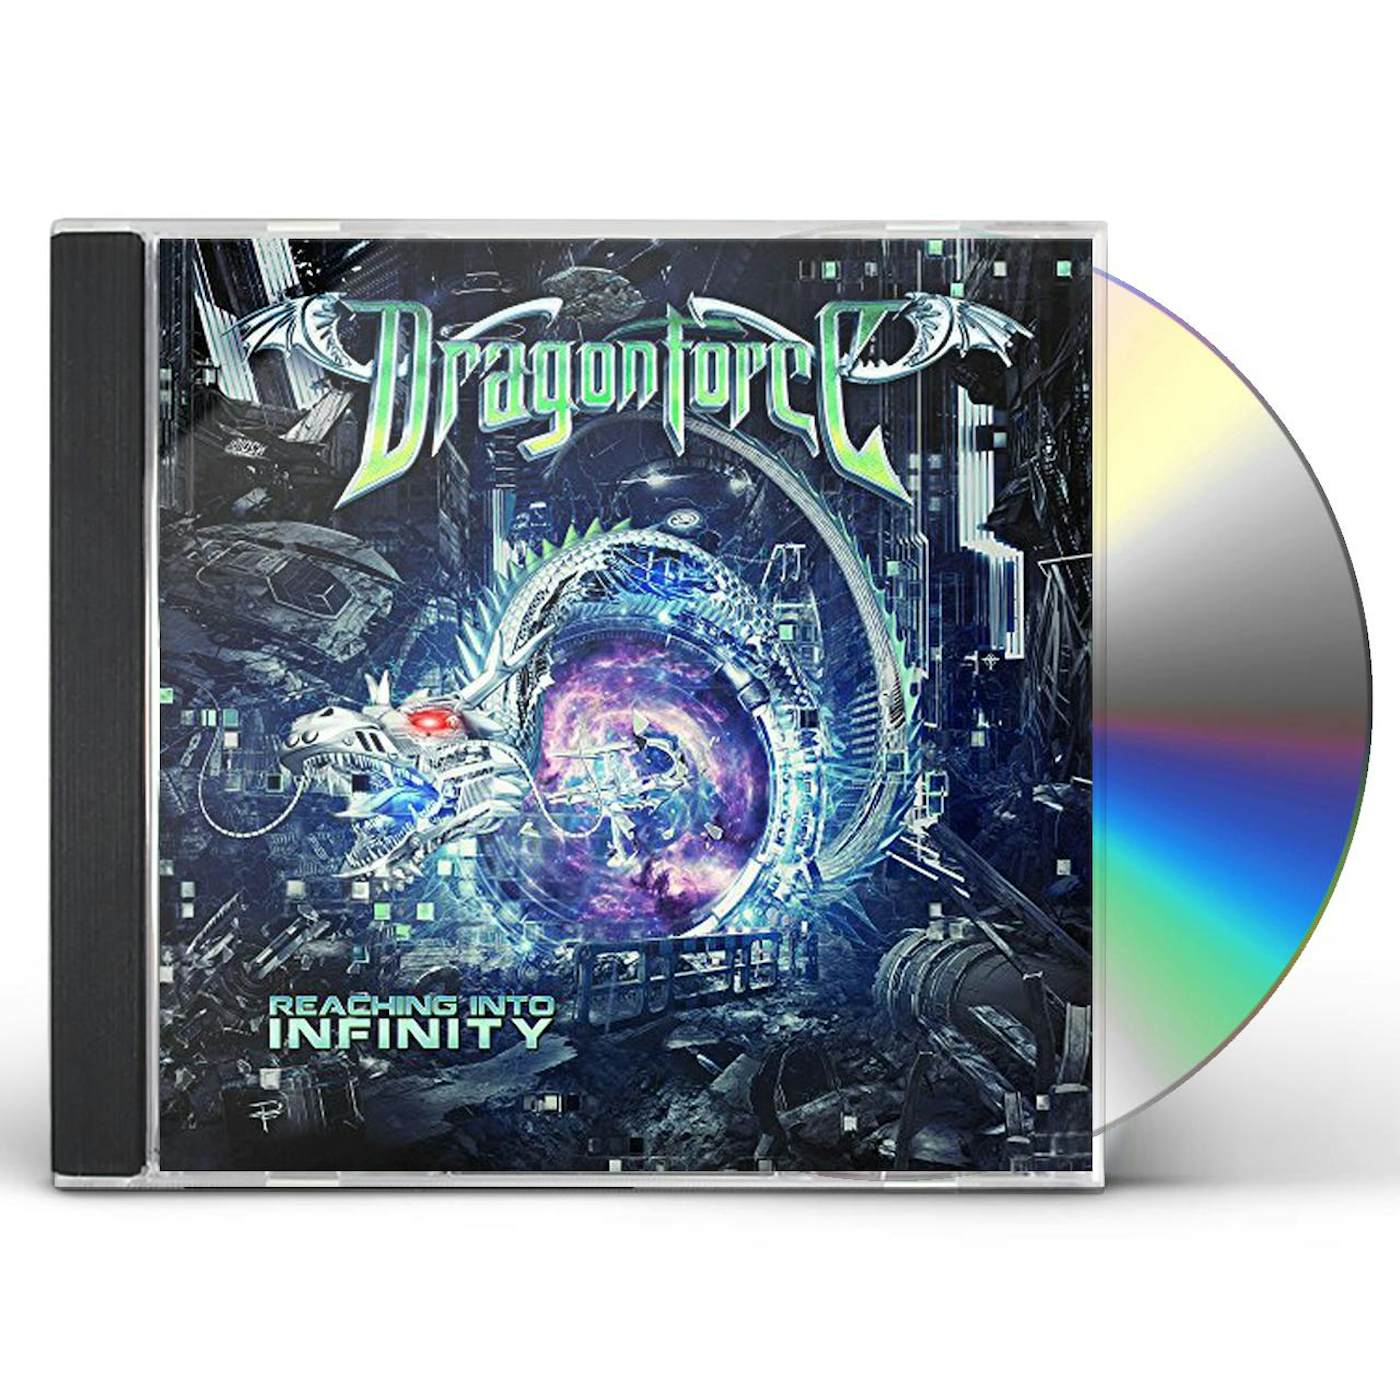 DragonForce REACHING INTO INFINITY CD